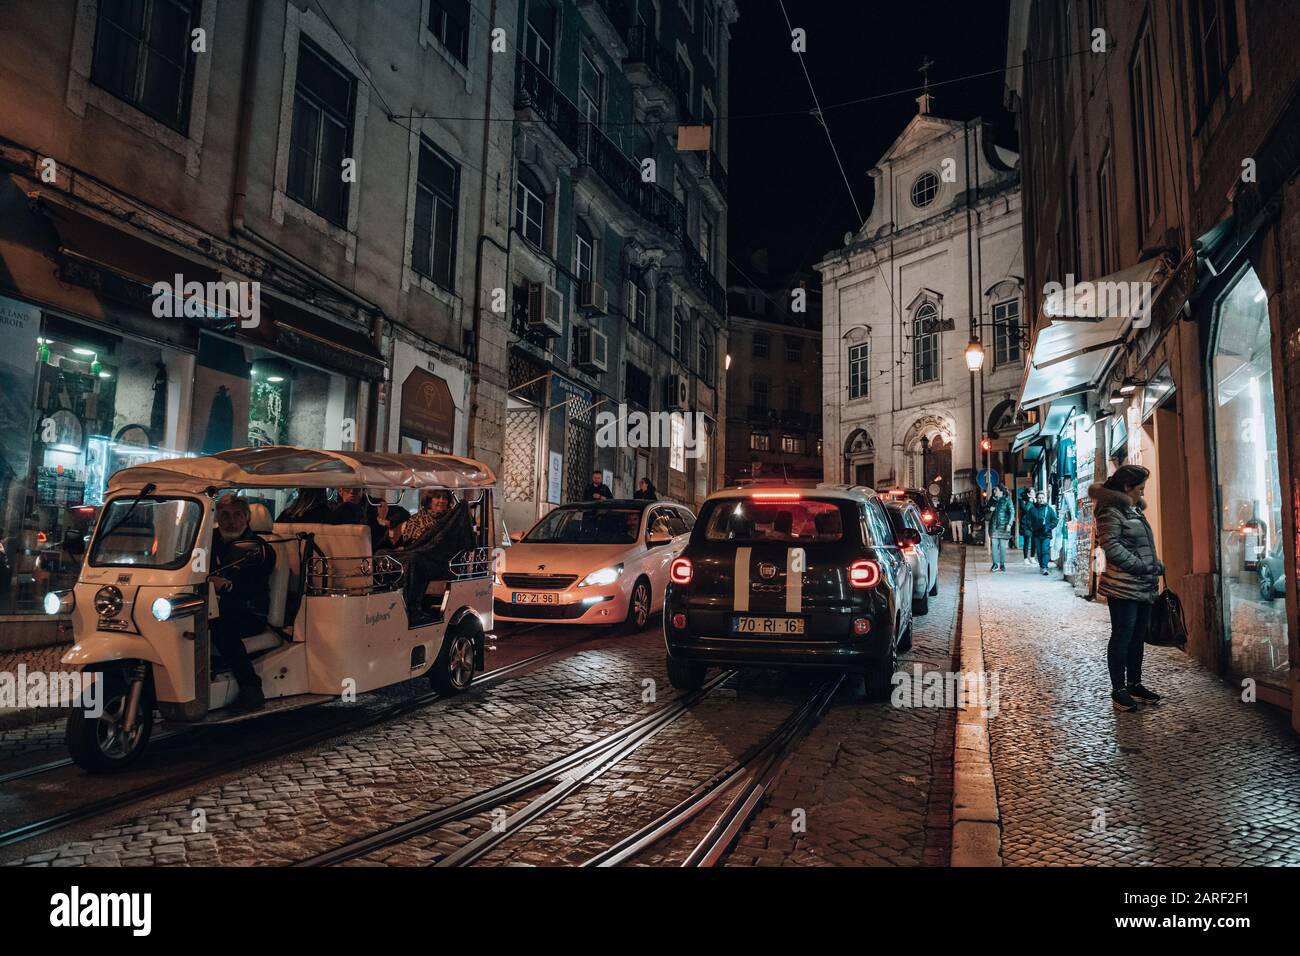 Lisbon, Portugal - January 19, 2020: Night street view of Lisbon, with cars and tuk tuk on the streets lined with shops Stock Photo